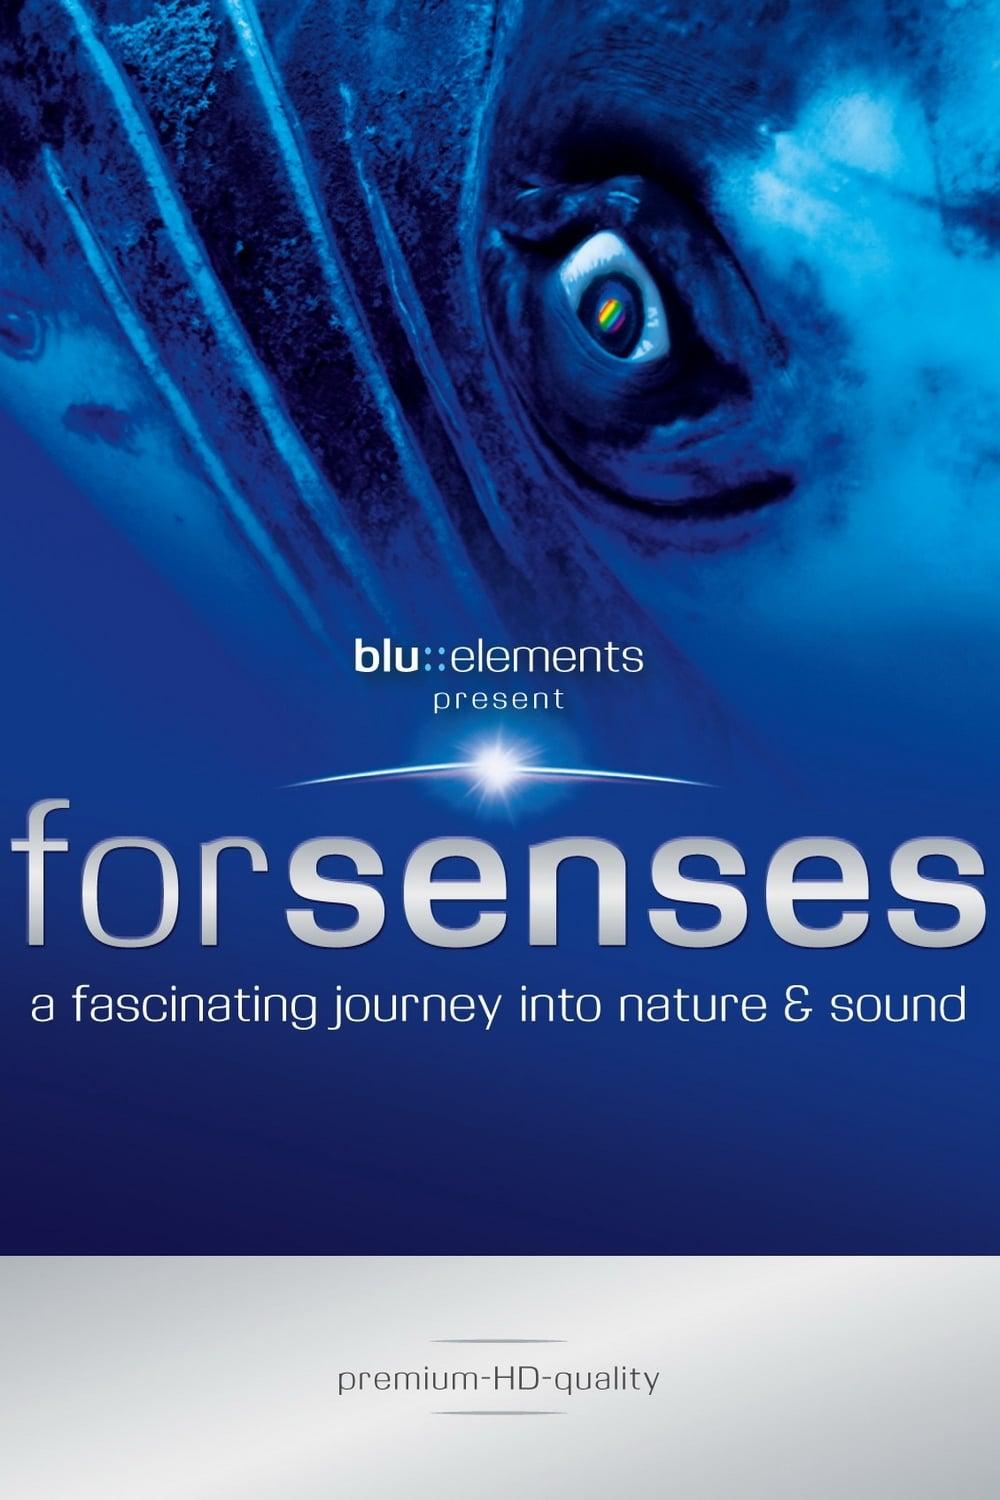 Forsenses - A Fascinating Journey into Nature & Sound poster